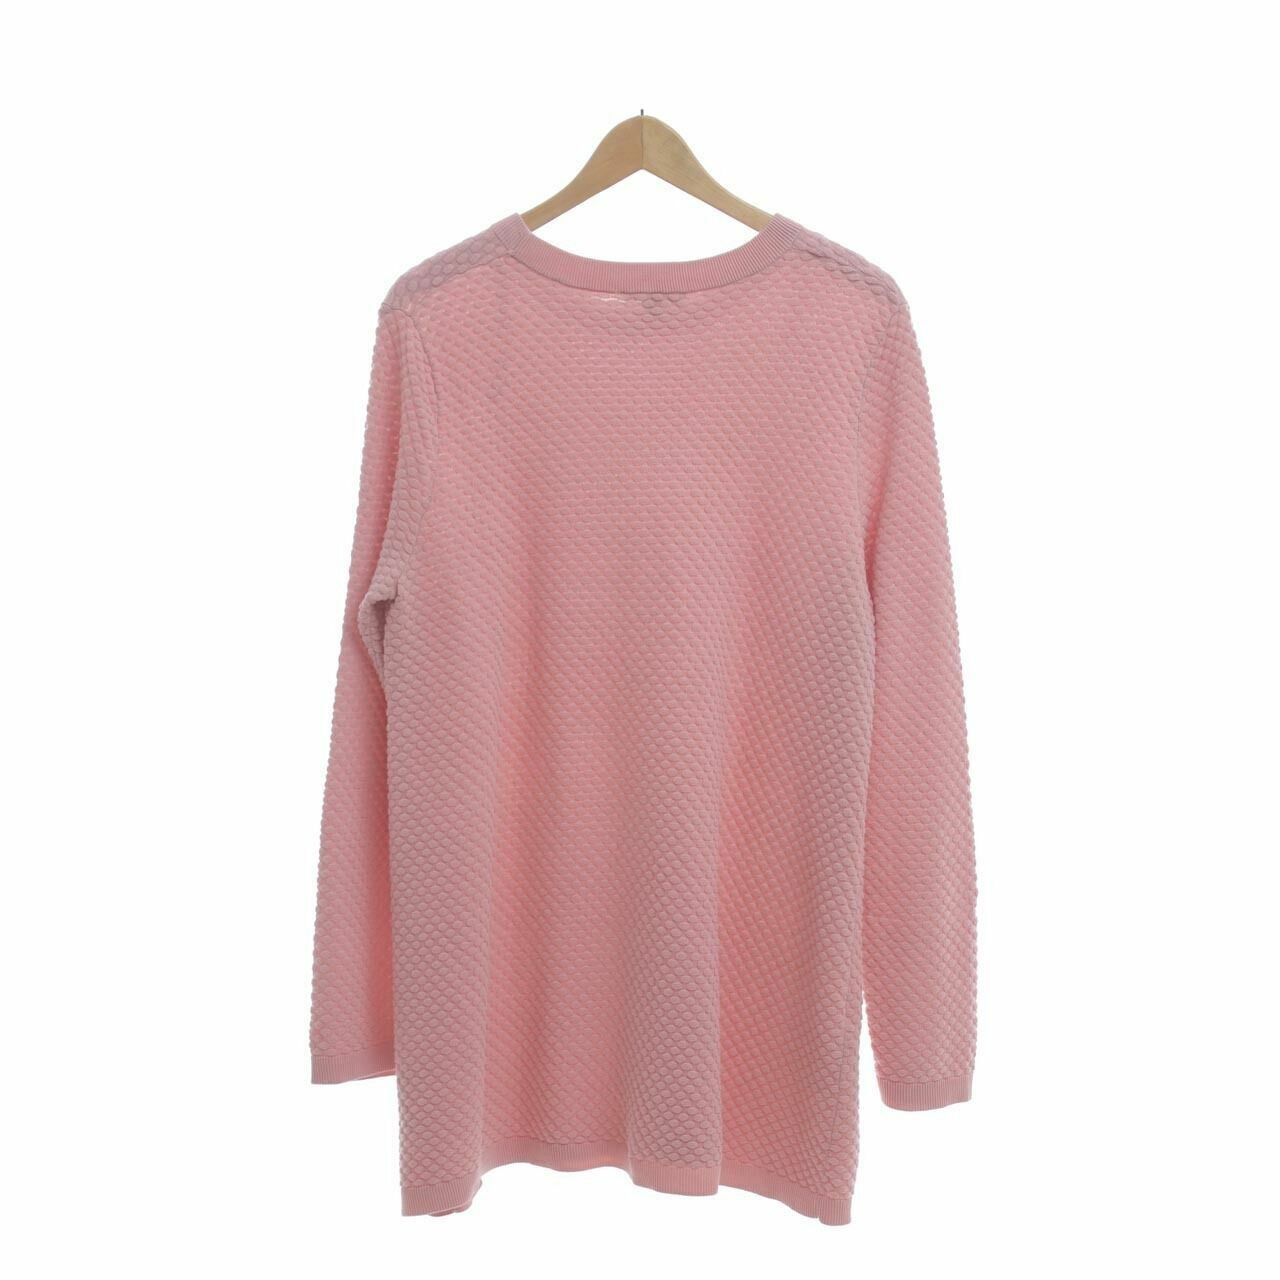 COS Dusty Pink Blouse